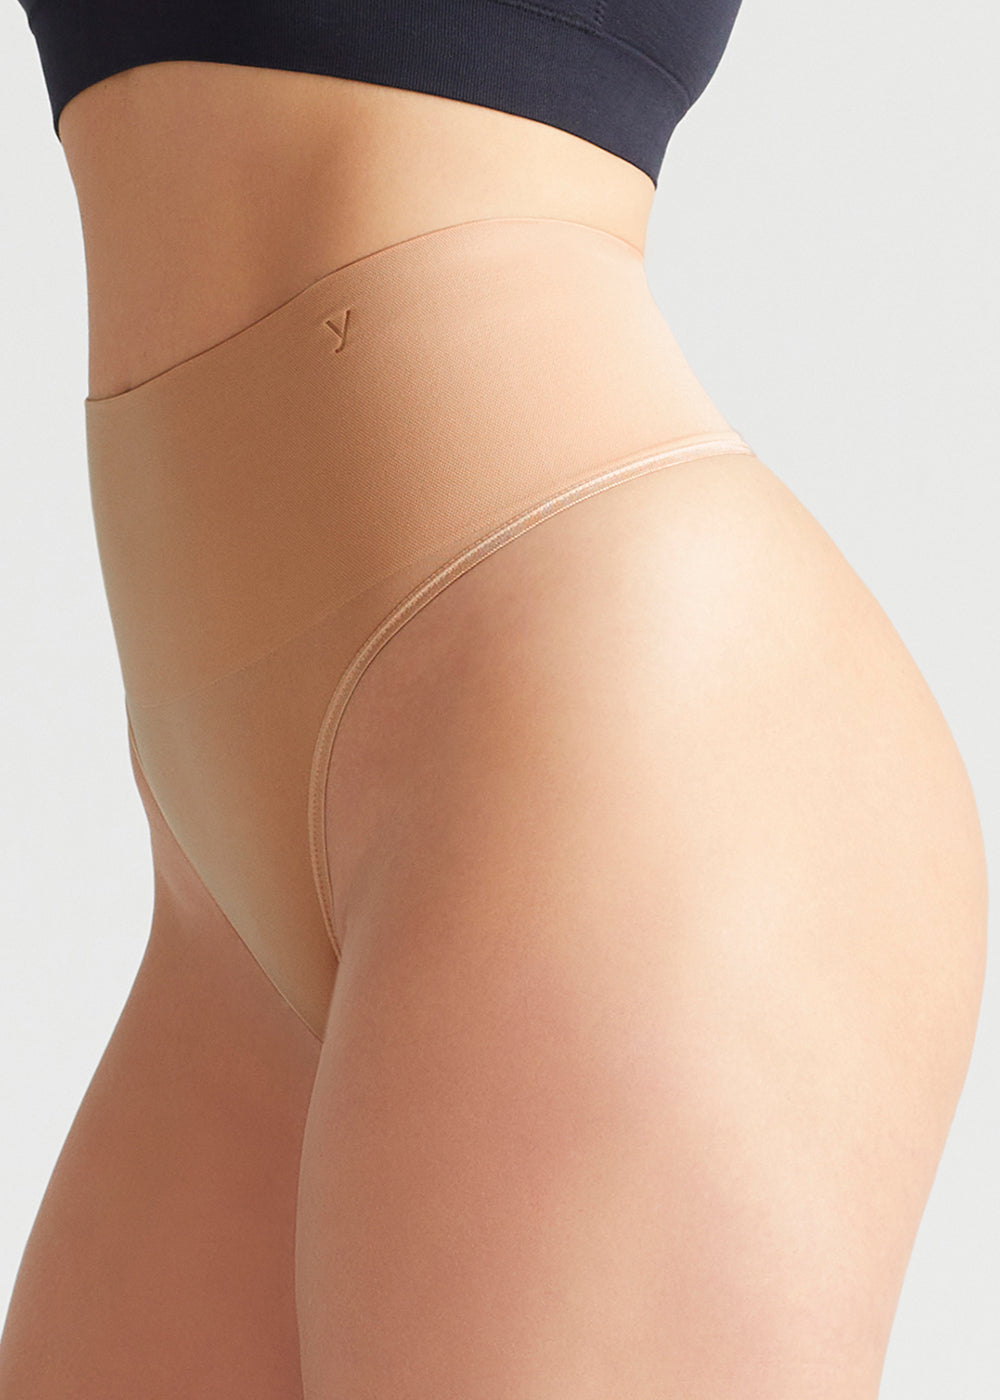 Ultralight Shaping Thong - Seamless from Yummie in Almond  - 1